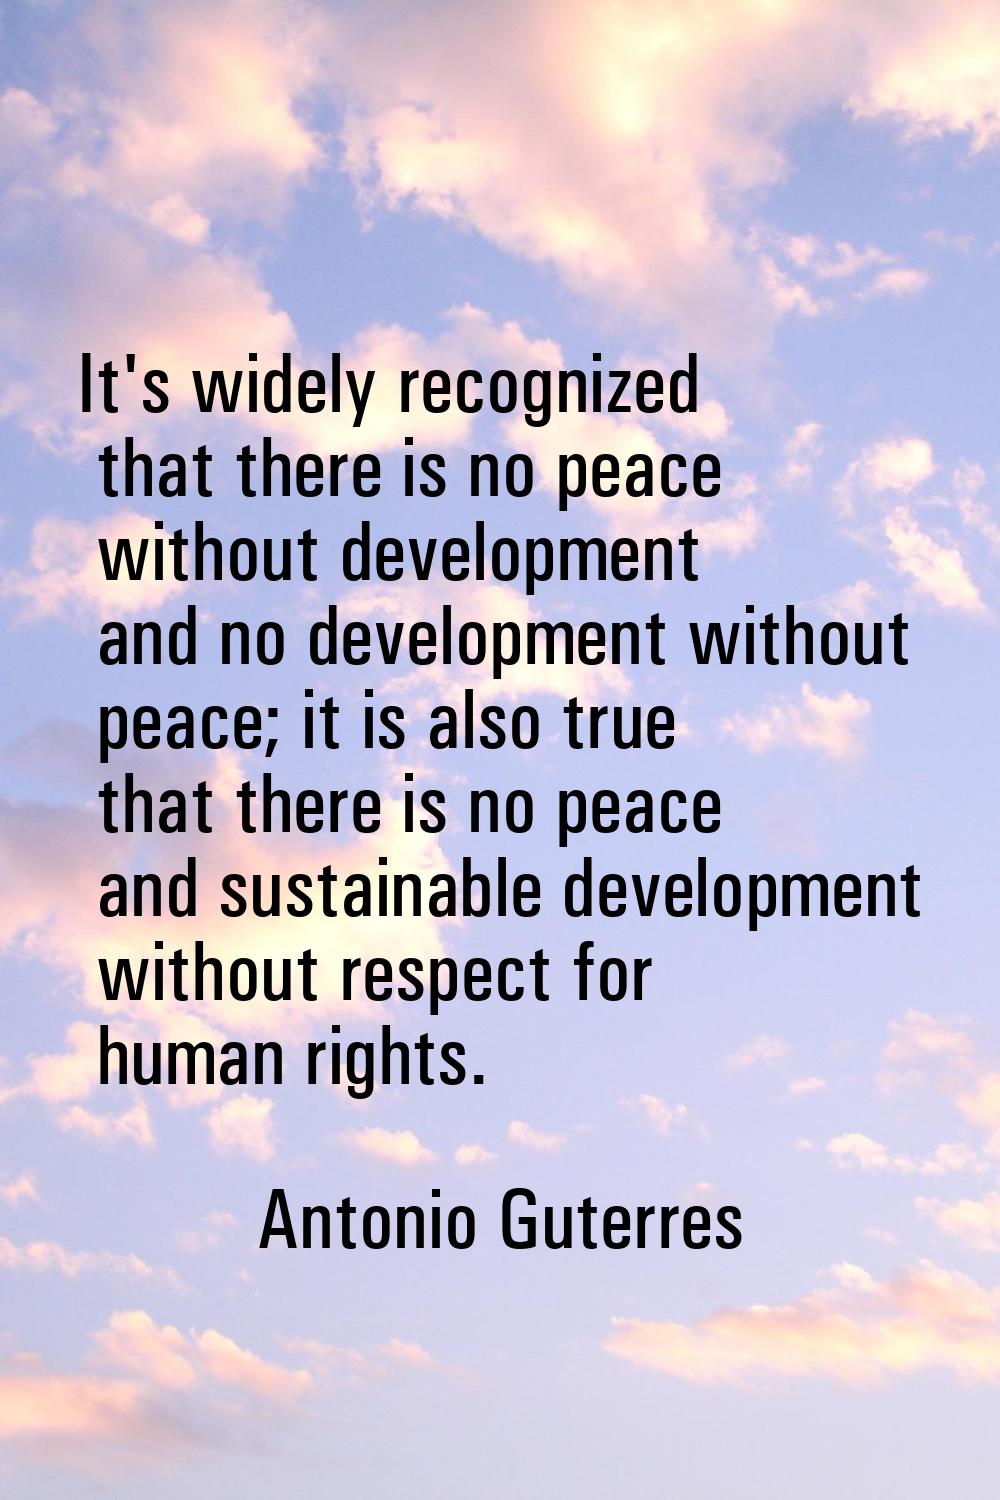 It's widely recognized that there is no peace without development and no development without peace;